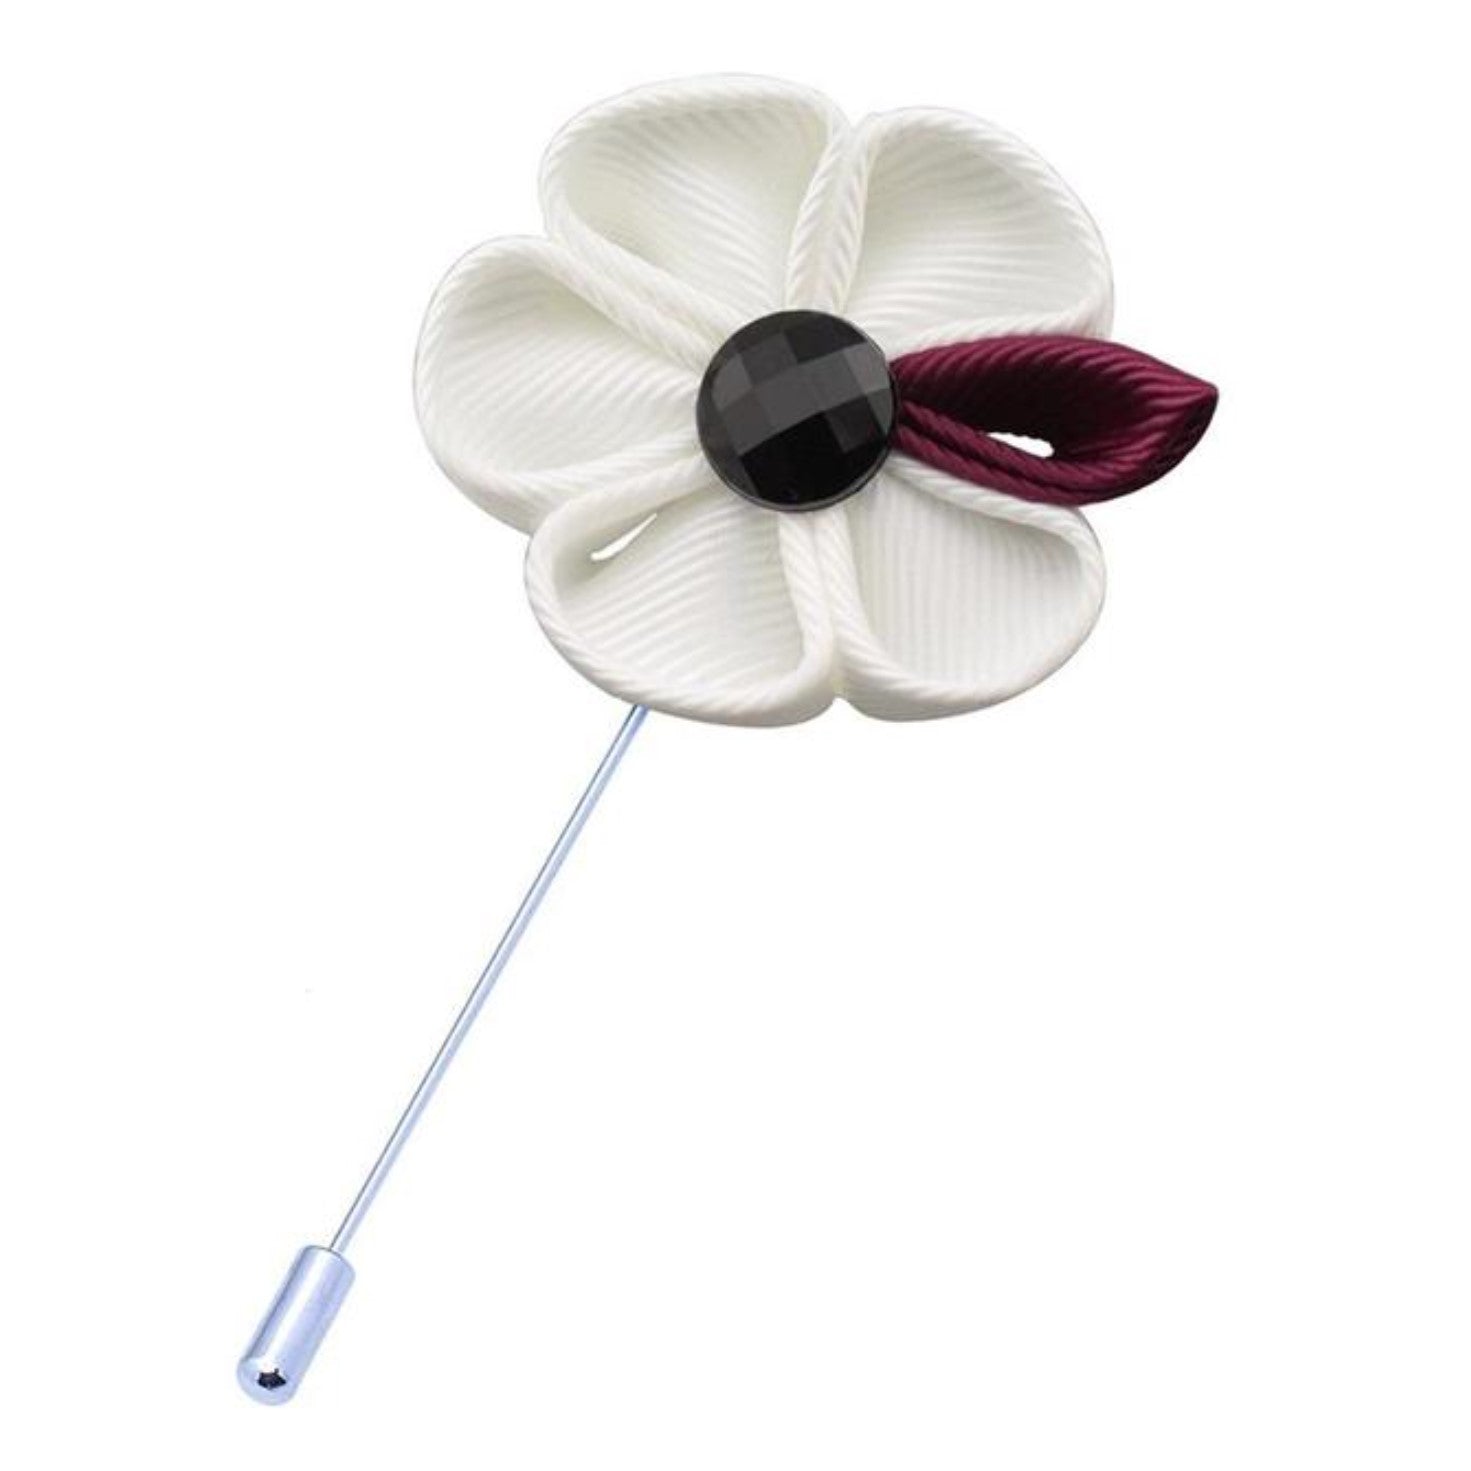 A White, Burgundy Colored Thick Petal Lapel Flower||White, Burgundy